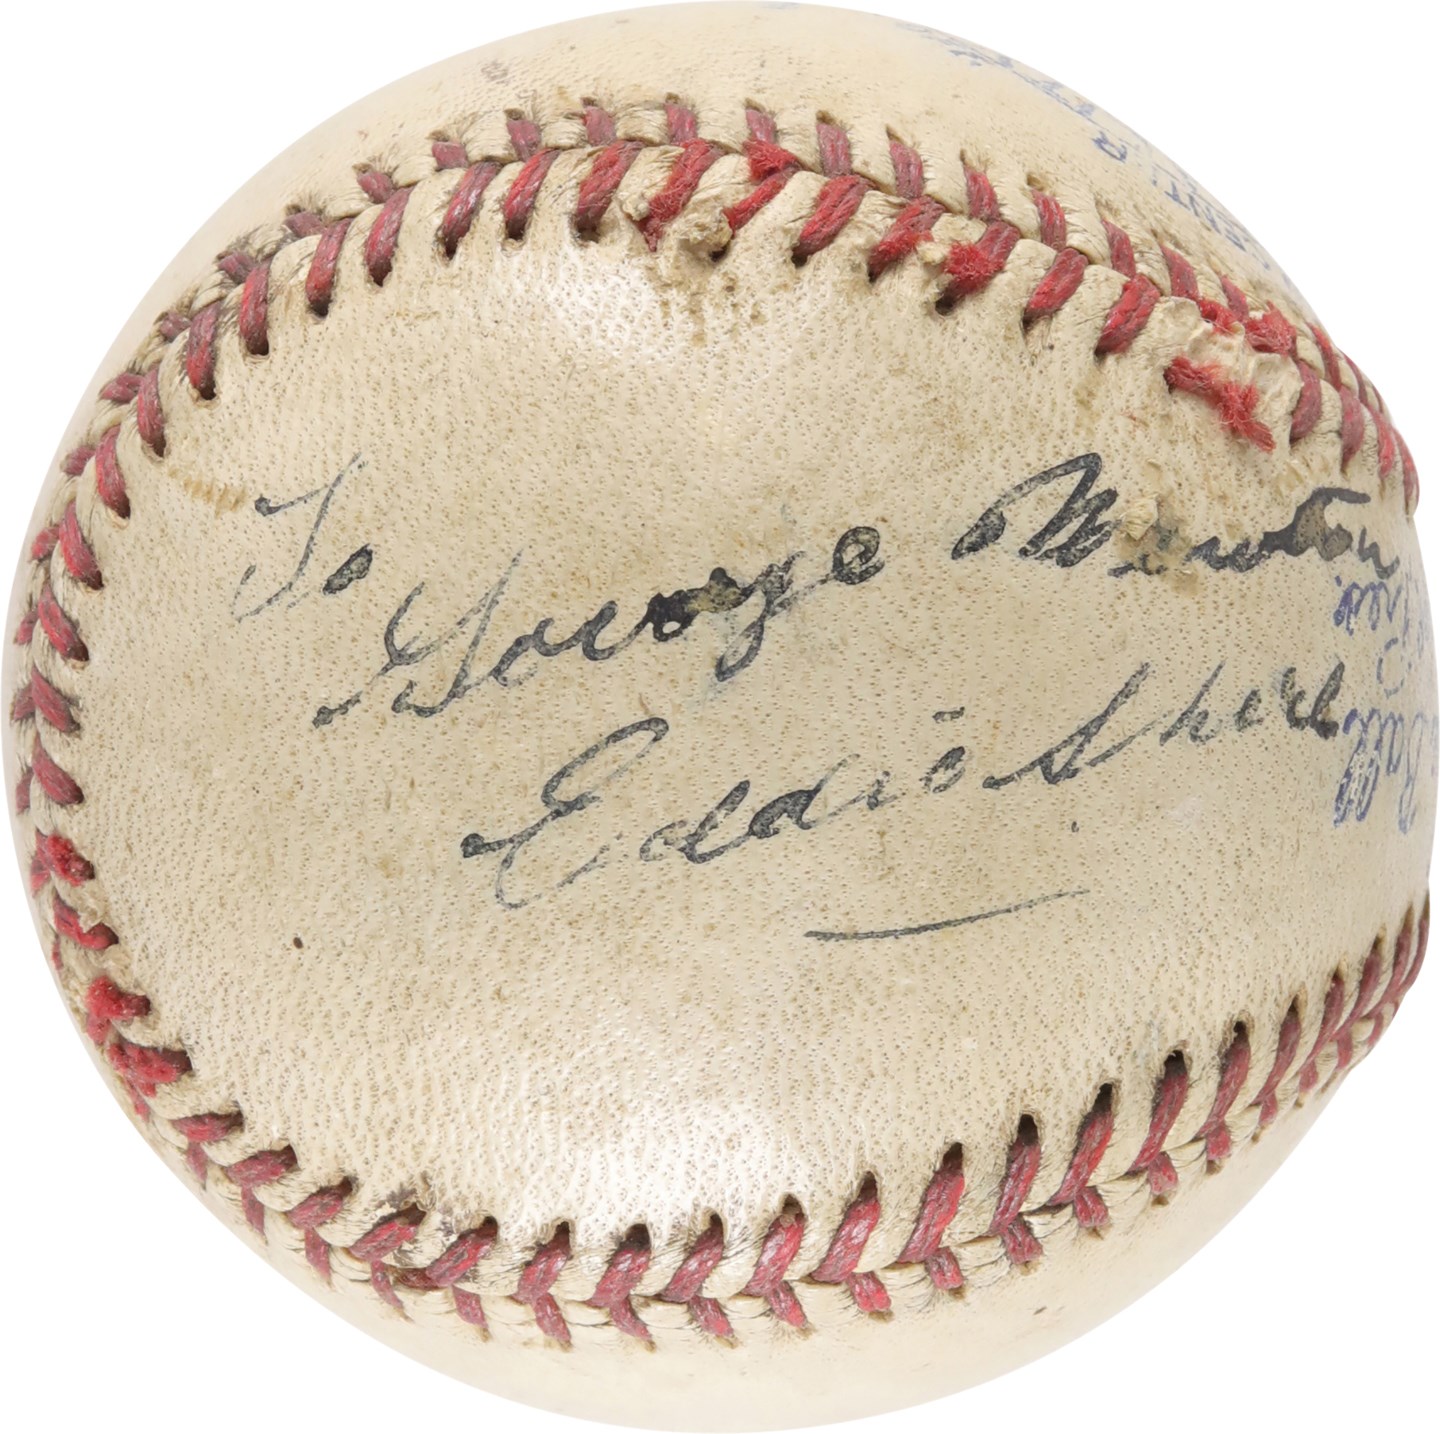 Hockey - 1930s Eddie Shore Single-Signed Baseball - Only Known Example (PSA)